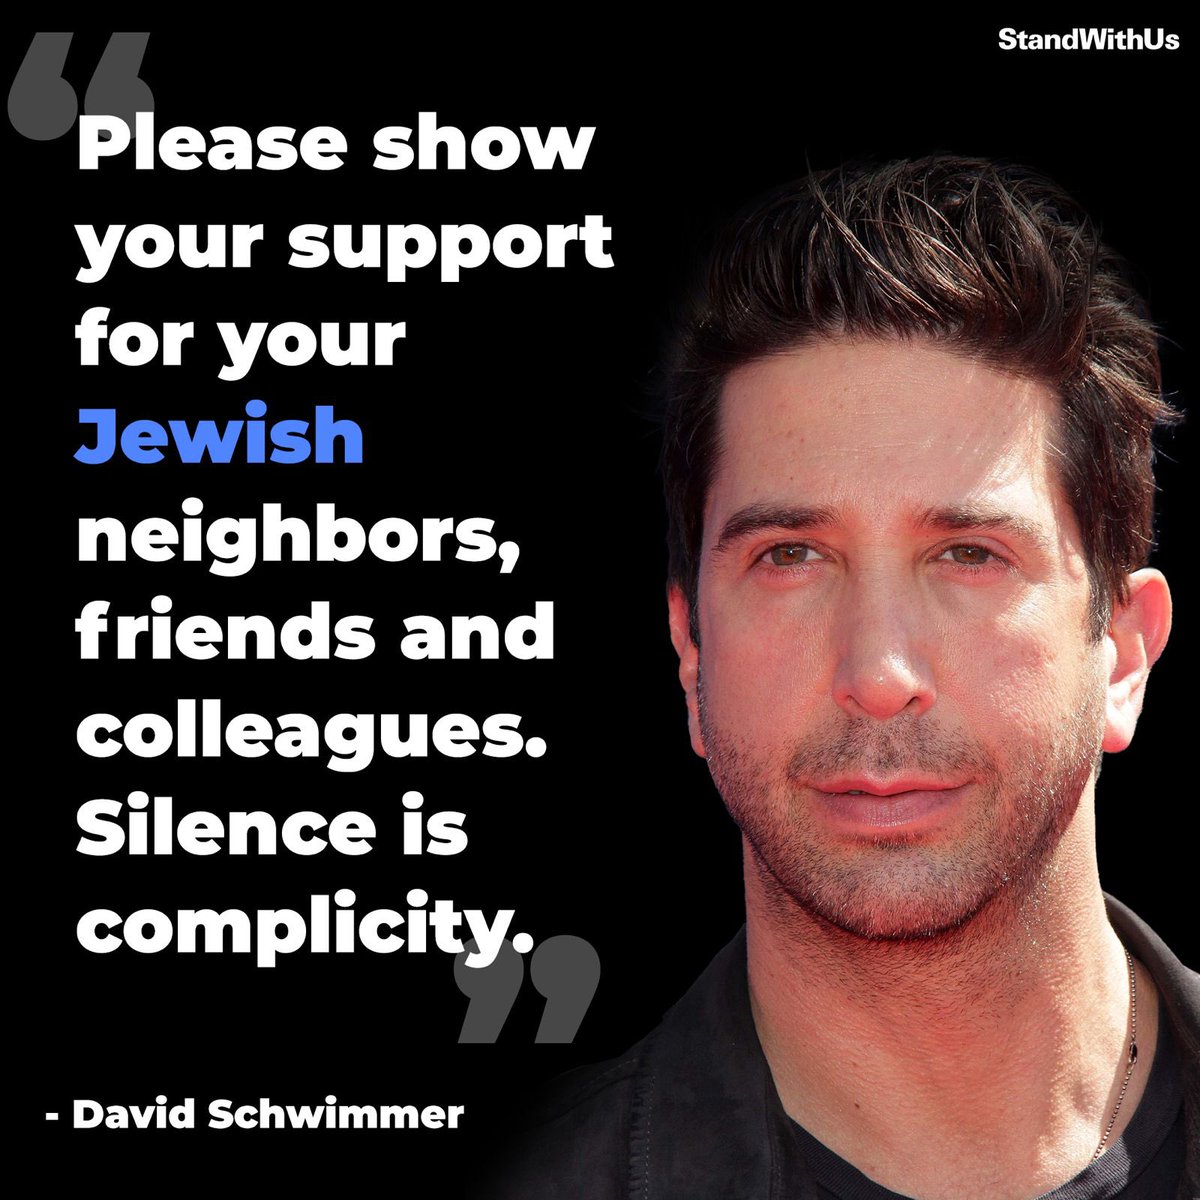 Thank you, David Schwimmer, for using your platform to support the Jewish people and fighting antisemitism.